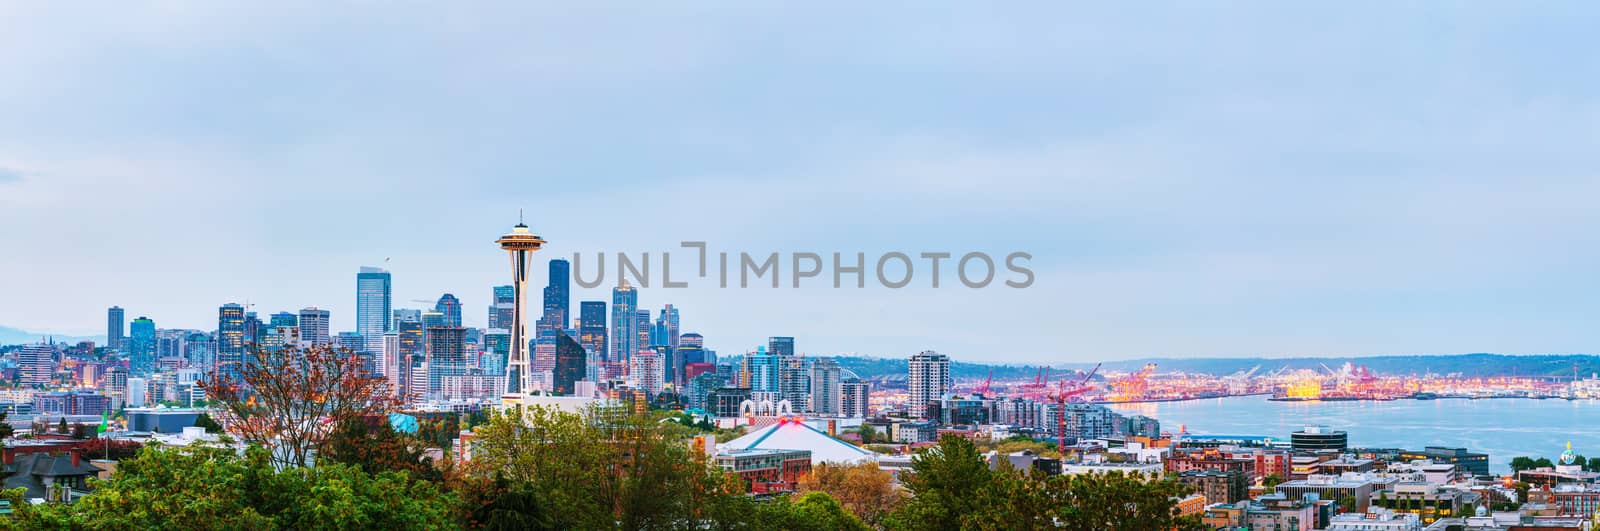 Downtown Seattle as seen from the Kerry park by AndreyKr